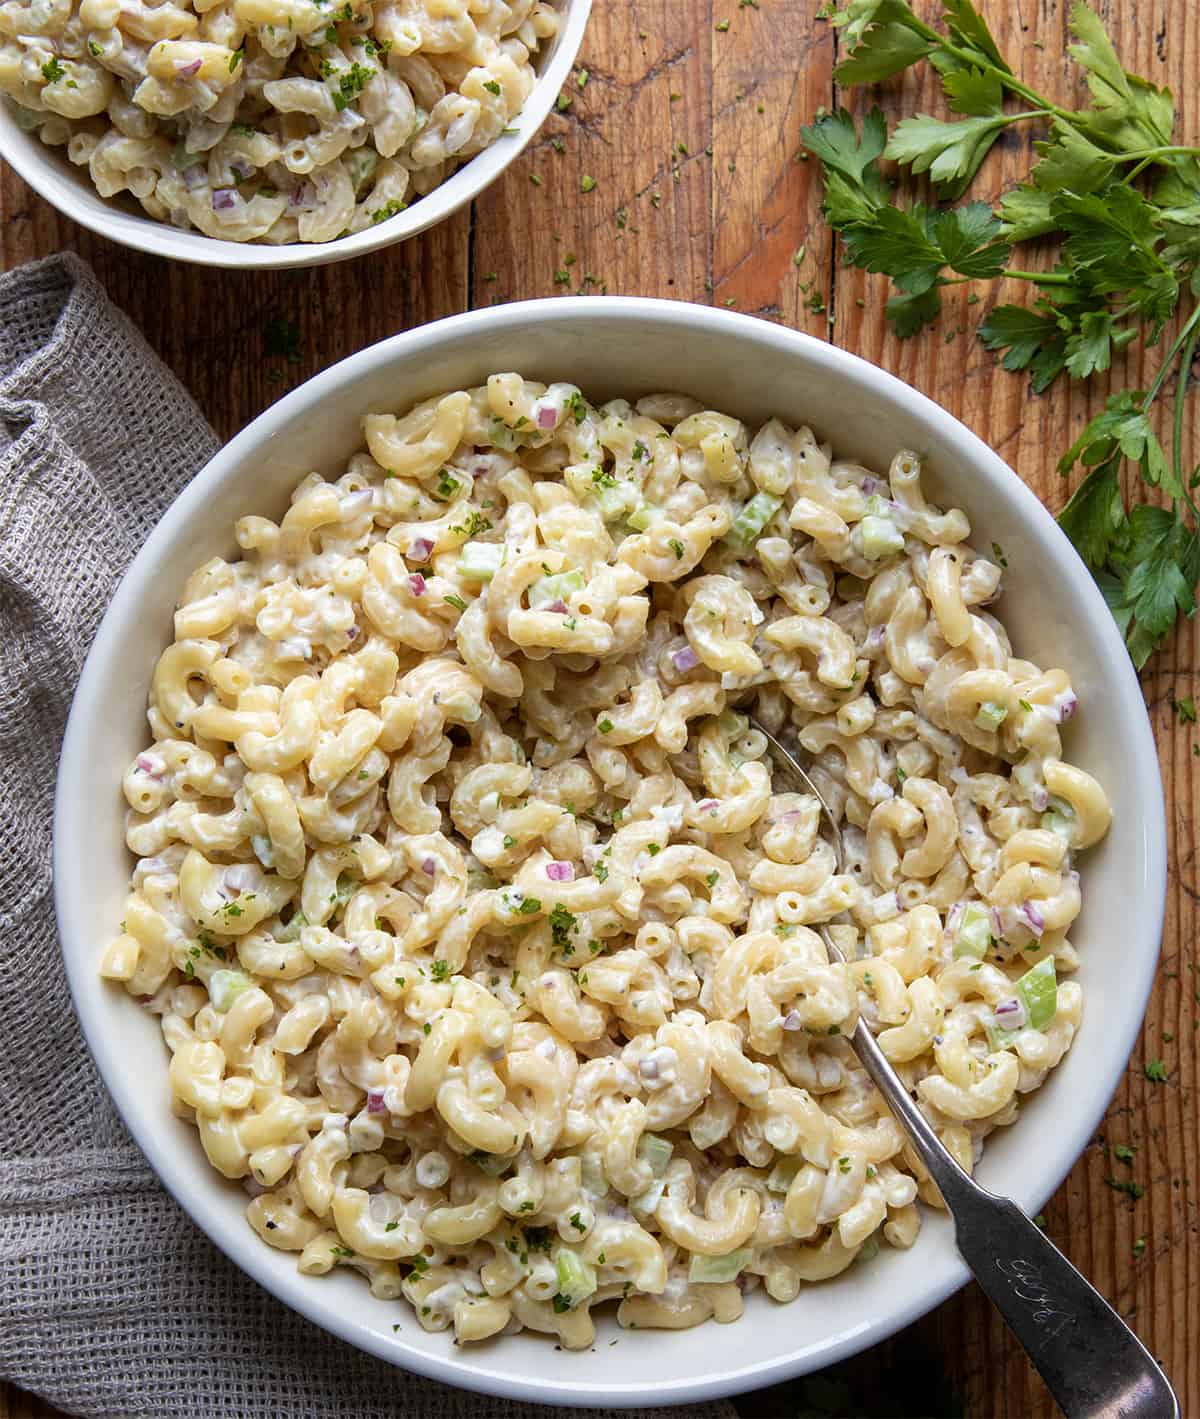 Macaroni Salad in a big bowl with a spoon on a wooden table.